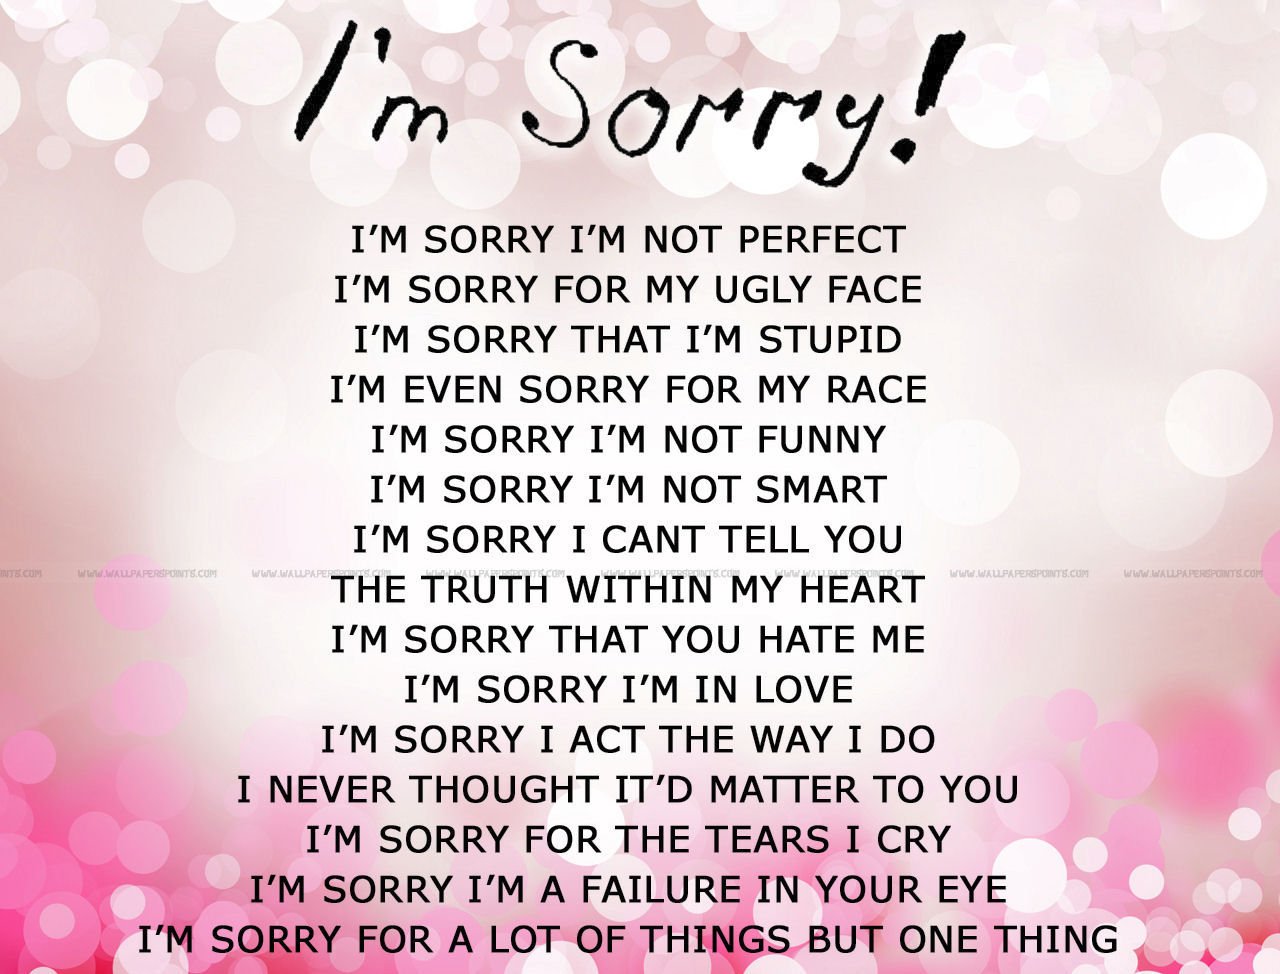 Day 53: 5 Extraordinary Ways To Say “I’m Sorry” and Mean It (using this 2-step process)